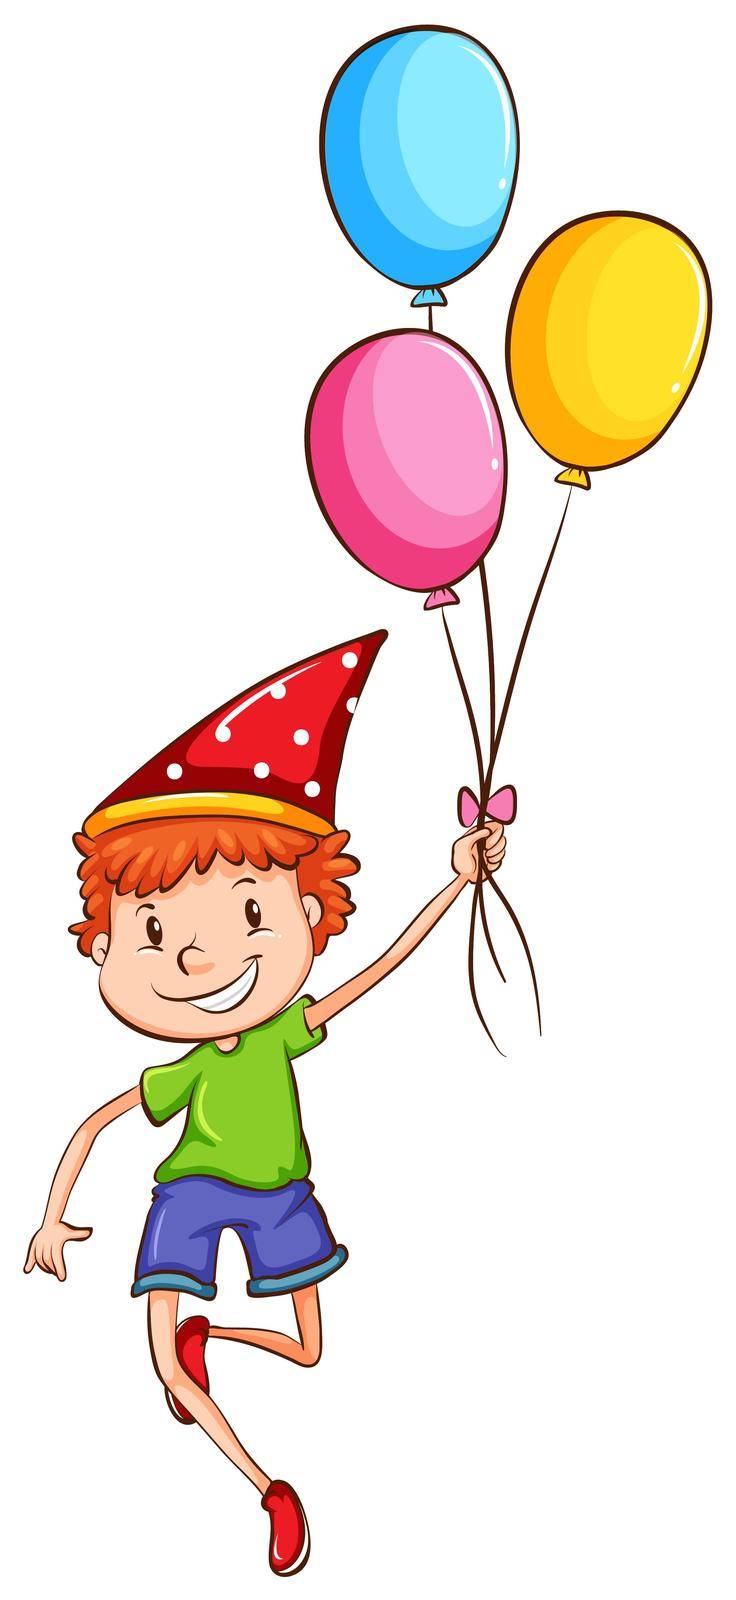 A sketch of a happy kid with balloons on a white background